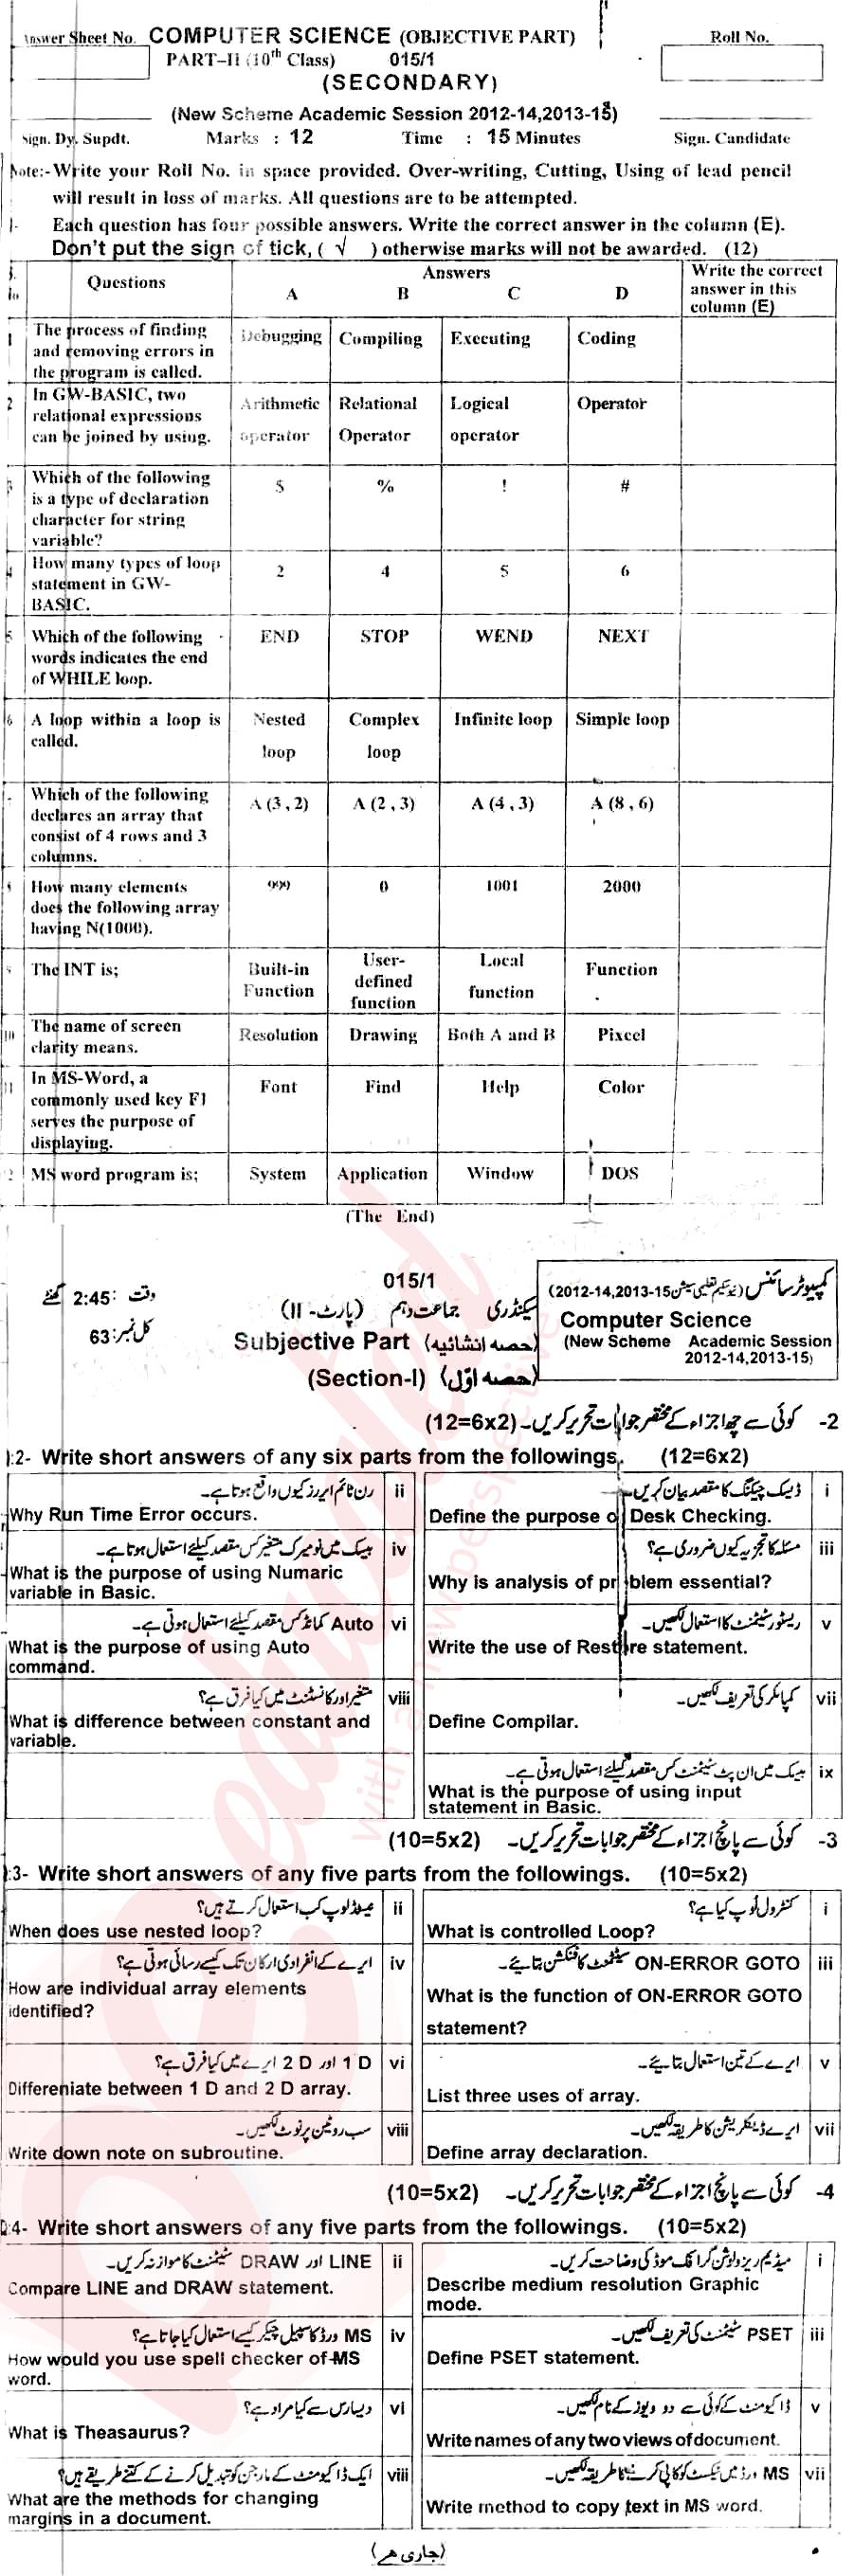 Computer Science 10th English Medium Past Paper Group 1 BISE AJK 2015